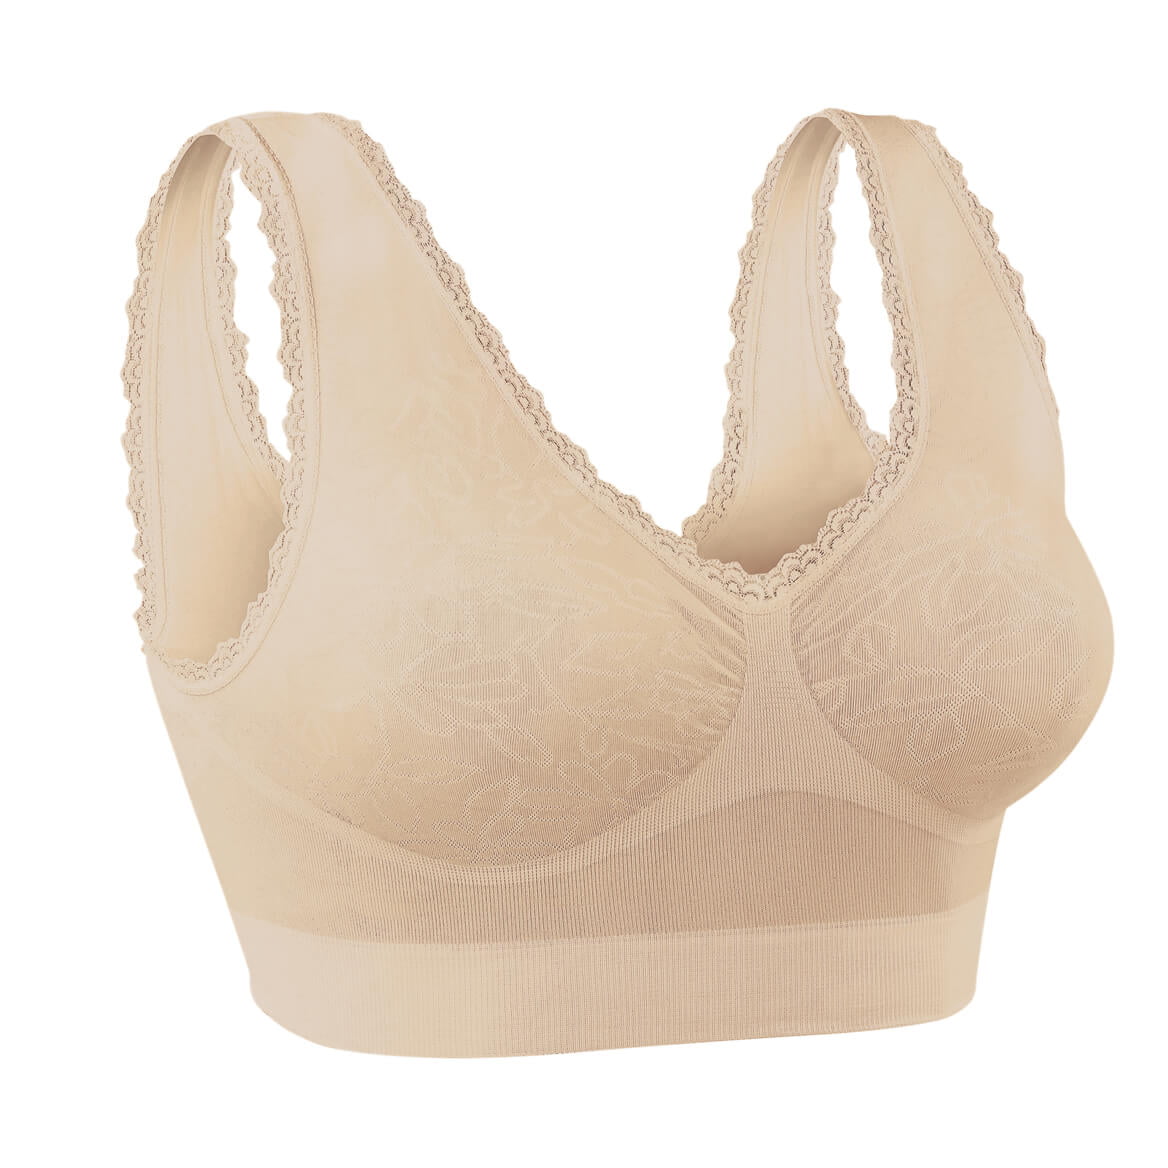 Smooth and Shape Lace Lingerie Bra 